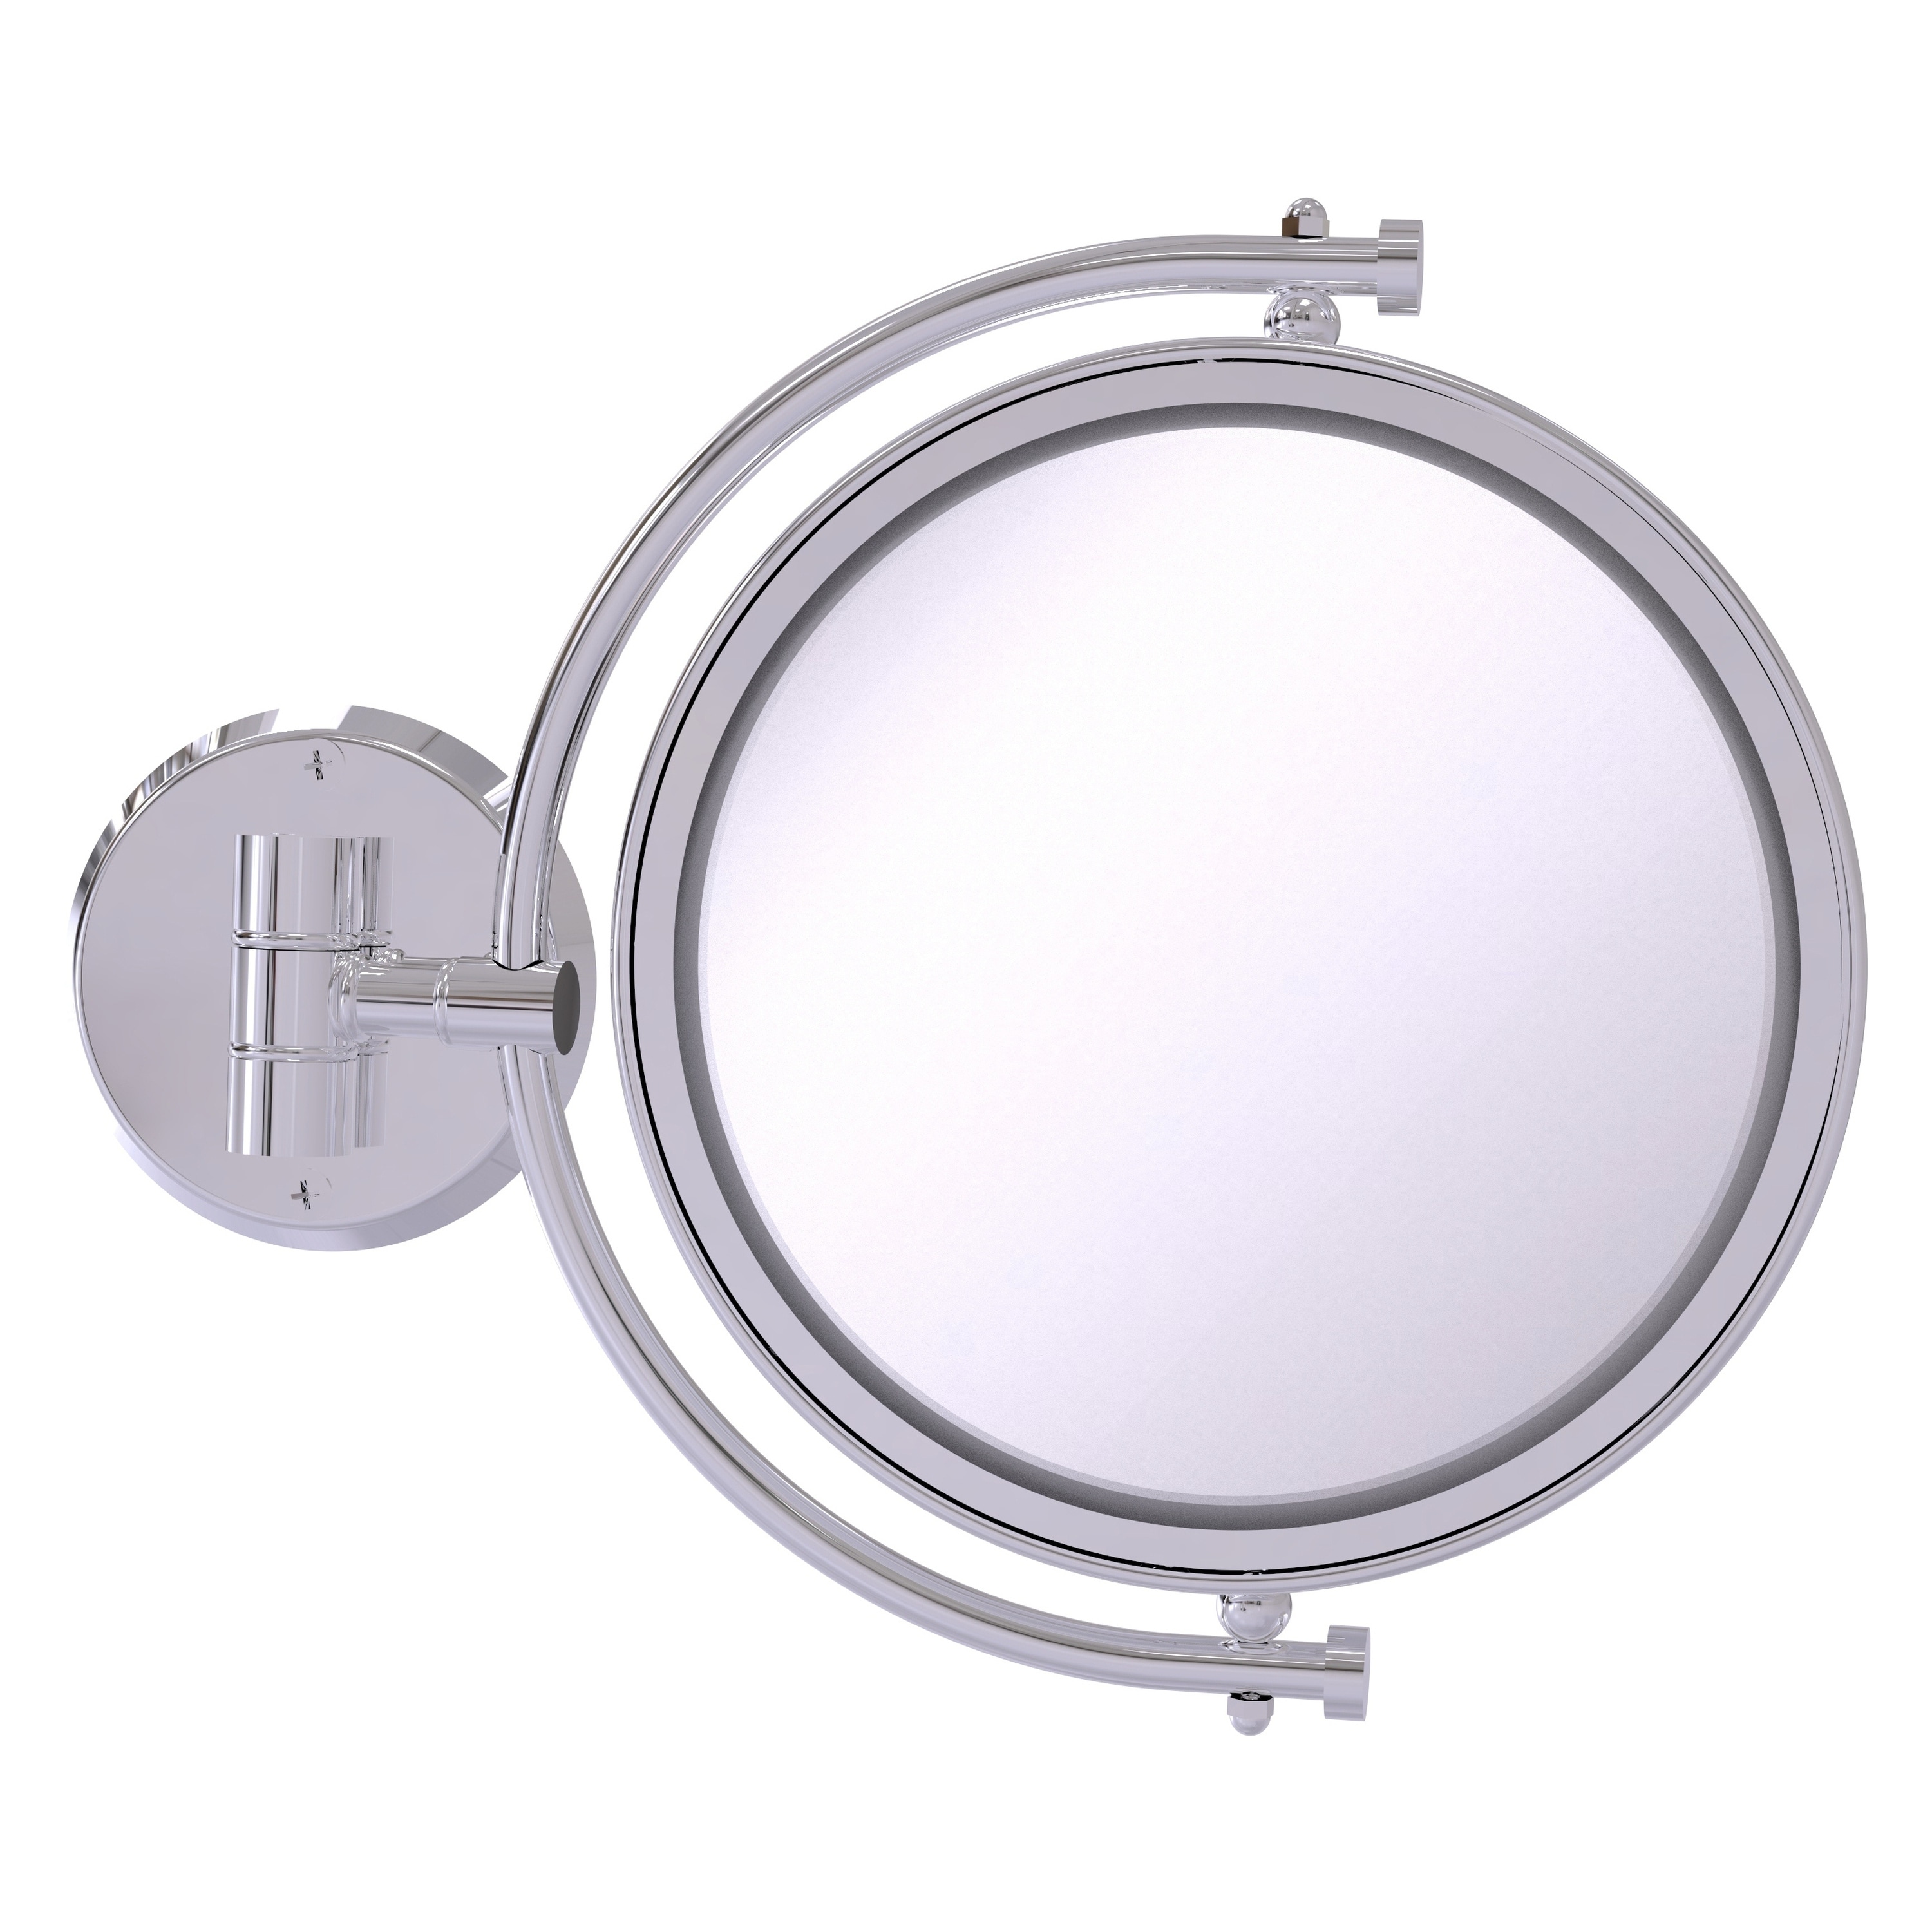 8-in x 10-in Polished Chrome Double-sided 3X Magnifying Wall-mounted Vanity Mirror | - Allied Brass WM-4/3X-PC